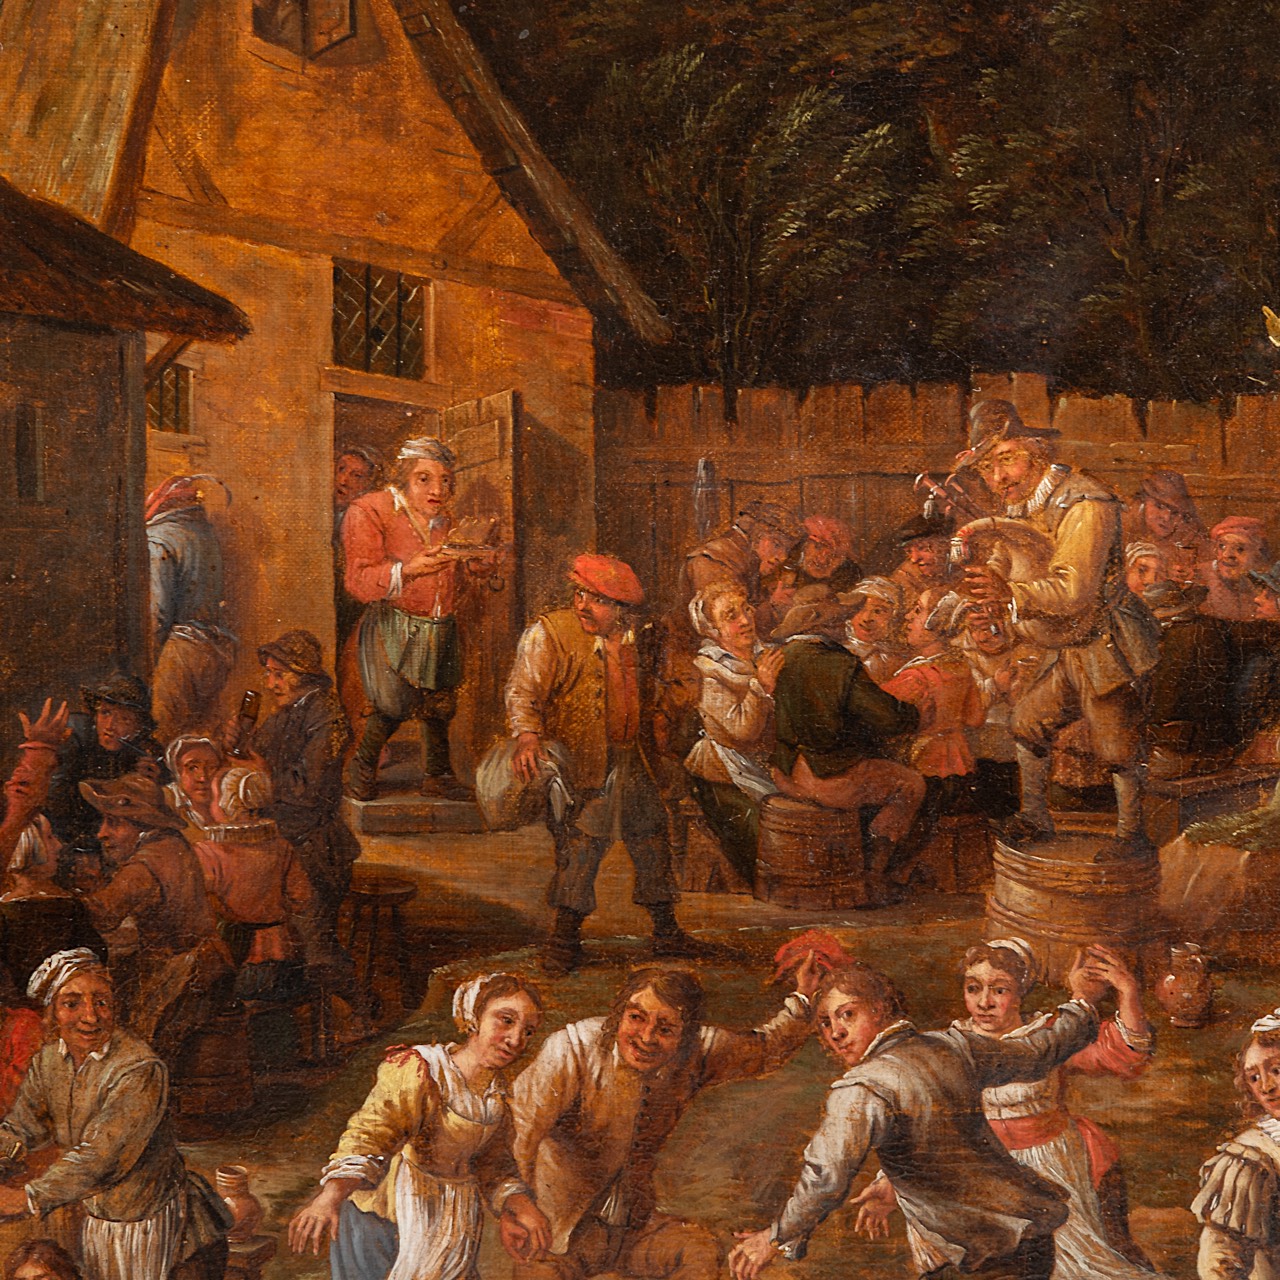 Attrib. to David II Teniers (1610-1690), village with an inn and peasants feasting and dancing, oil - Image 6 of 10